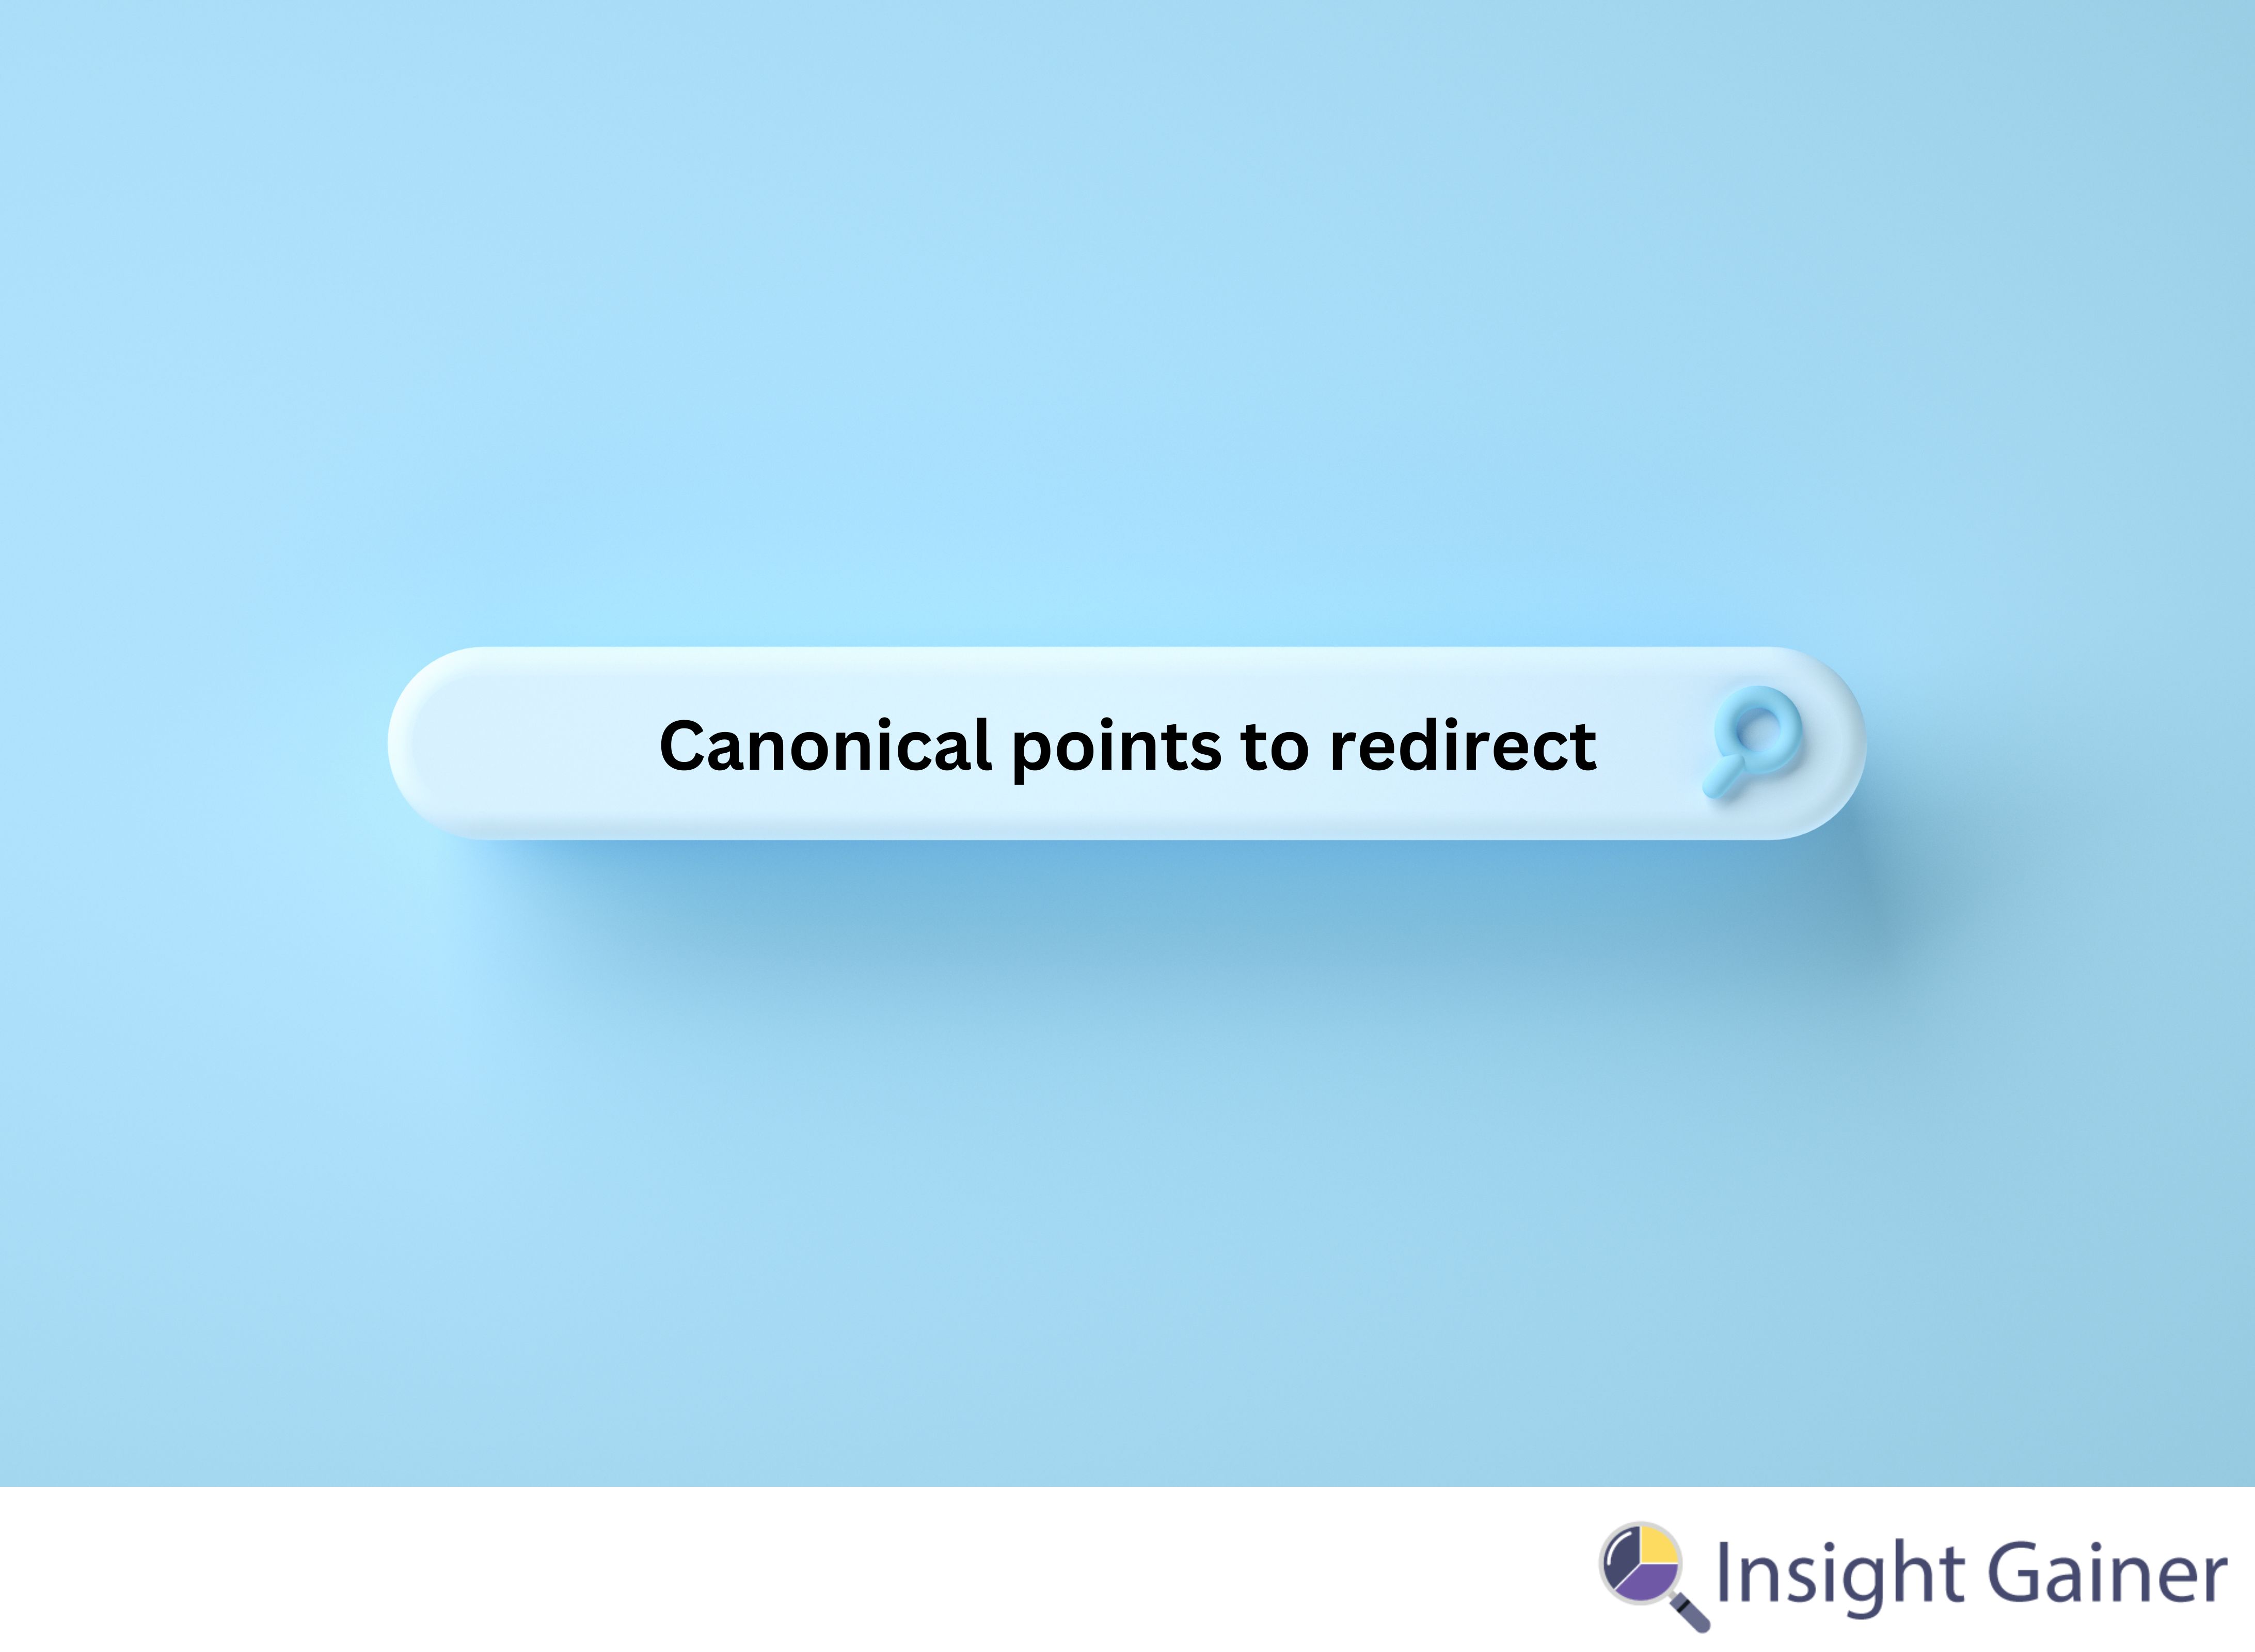 Canonical points to redirect, Insight Gainer